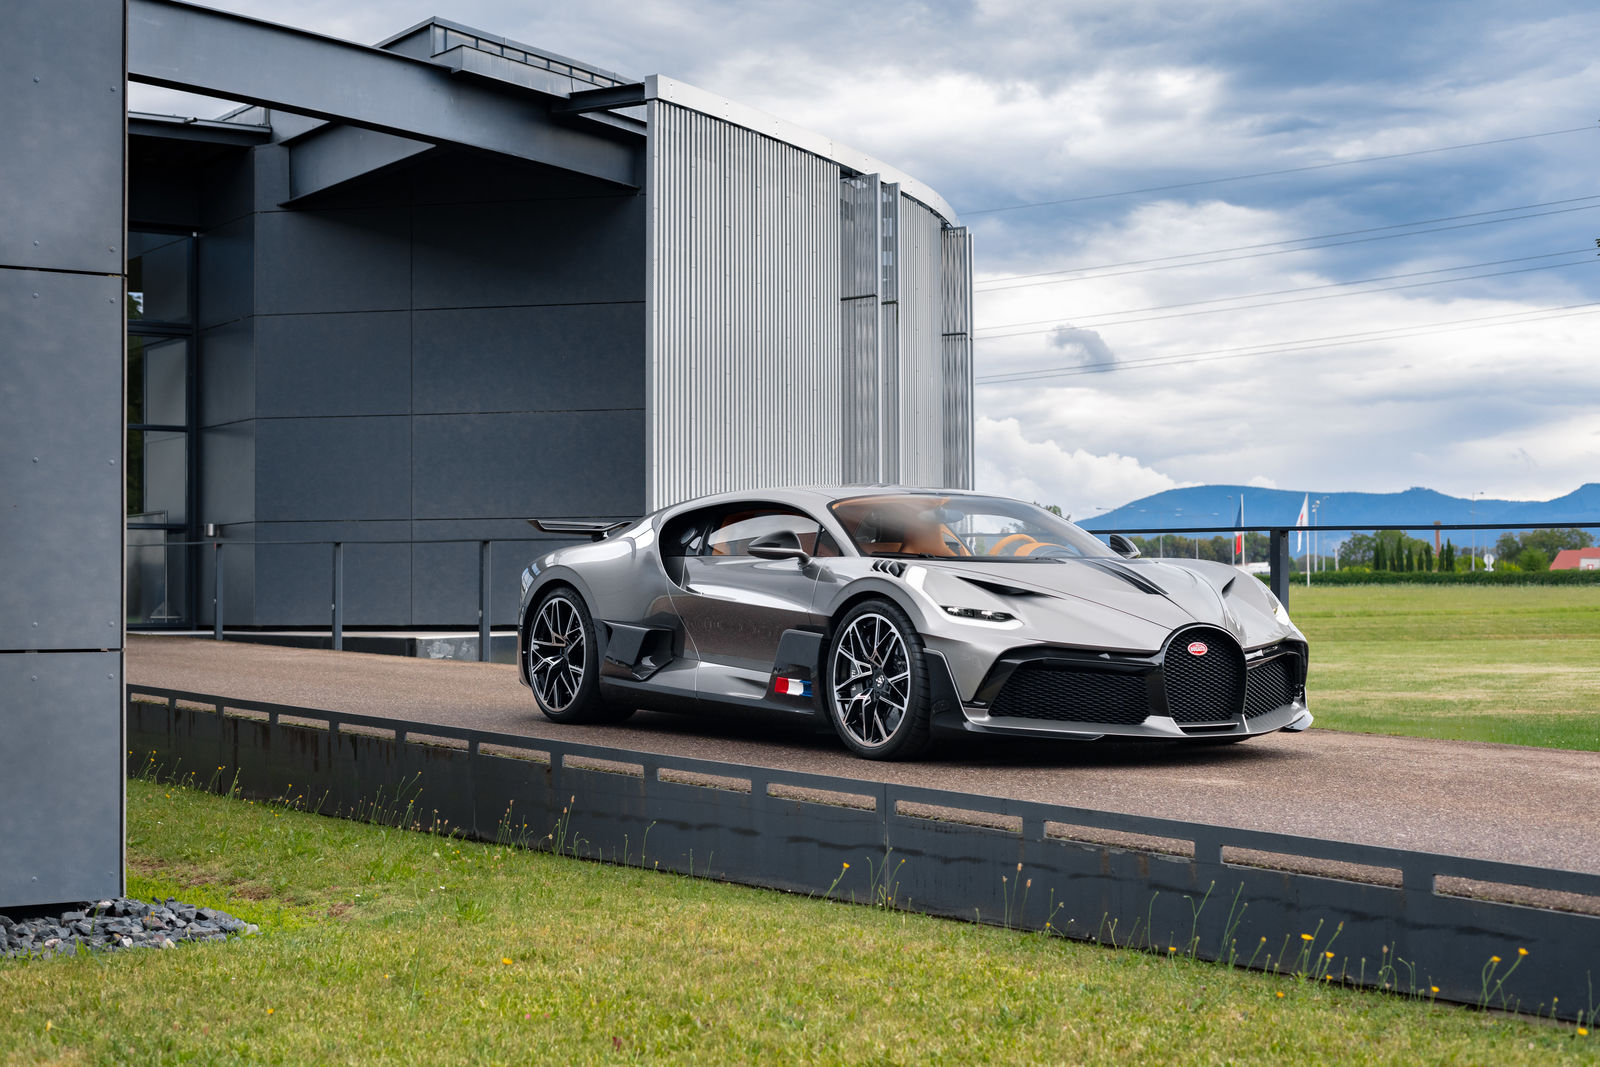 Two Years Later, Bugatti Kicks Divo hp Shipments: - Track Battles Off 1,500 On Are autoevolution